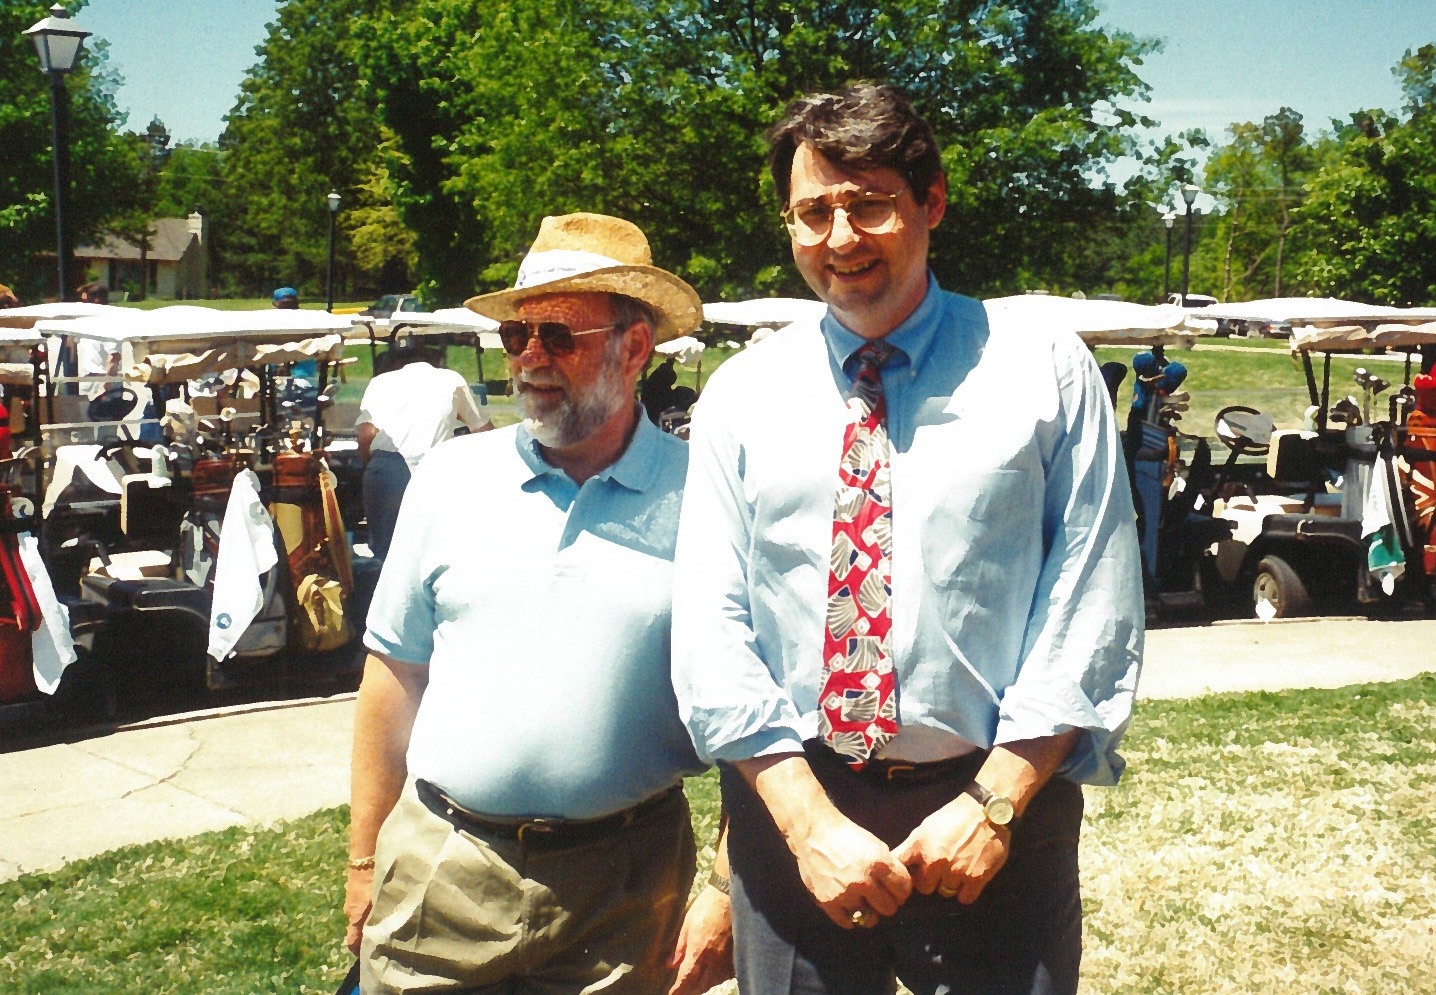 United Ability employees at golf tournament in the 1990s